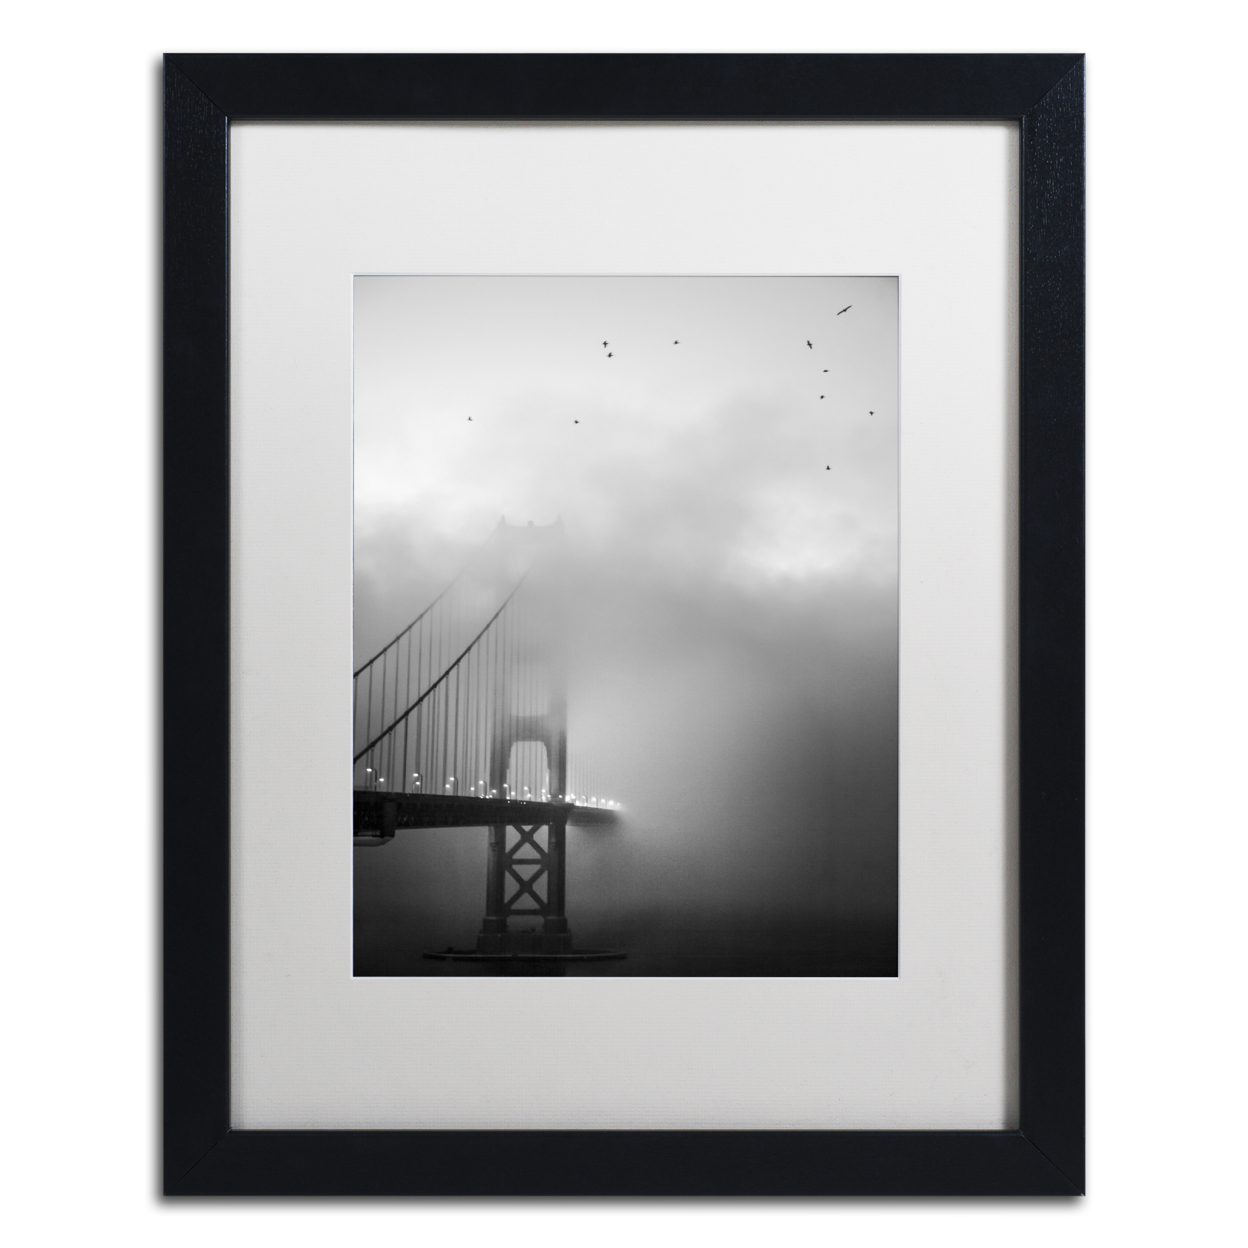 Moises Levy 'Golden Gate And Birds' Black Wooden Framed Art 18 X 22 Inches